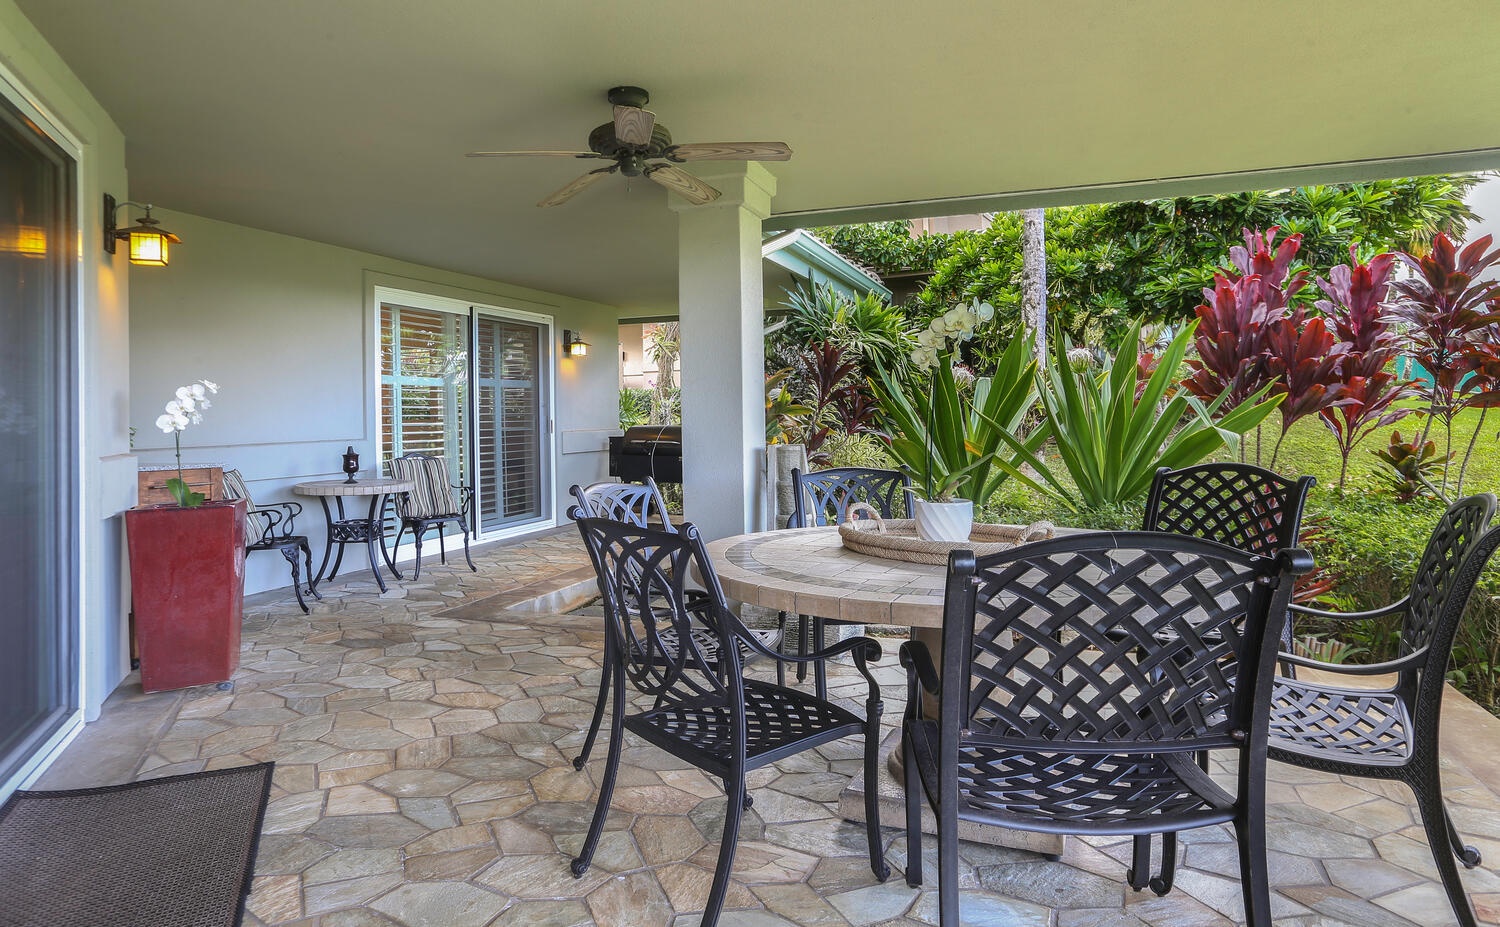 Princeville Vacation Rentals, Hale Moana - Enjoy your morning coffee or dinner al fresco on the covered lanai